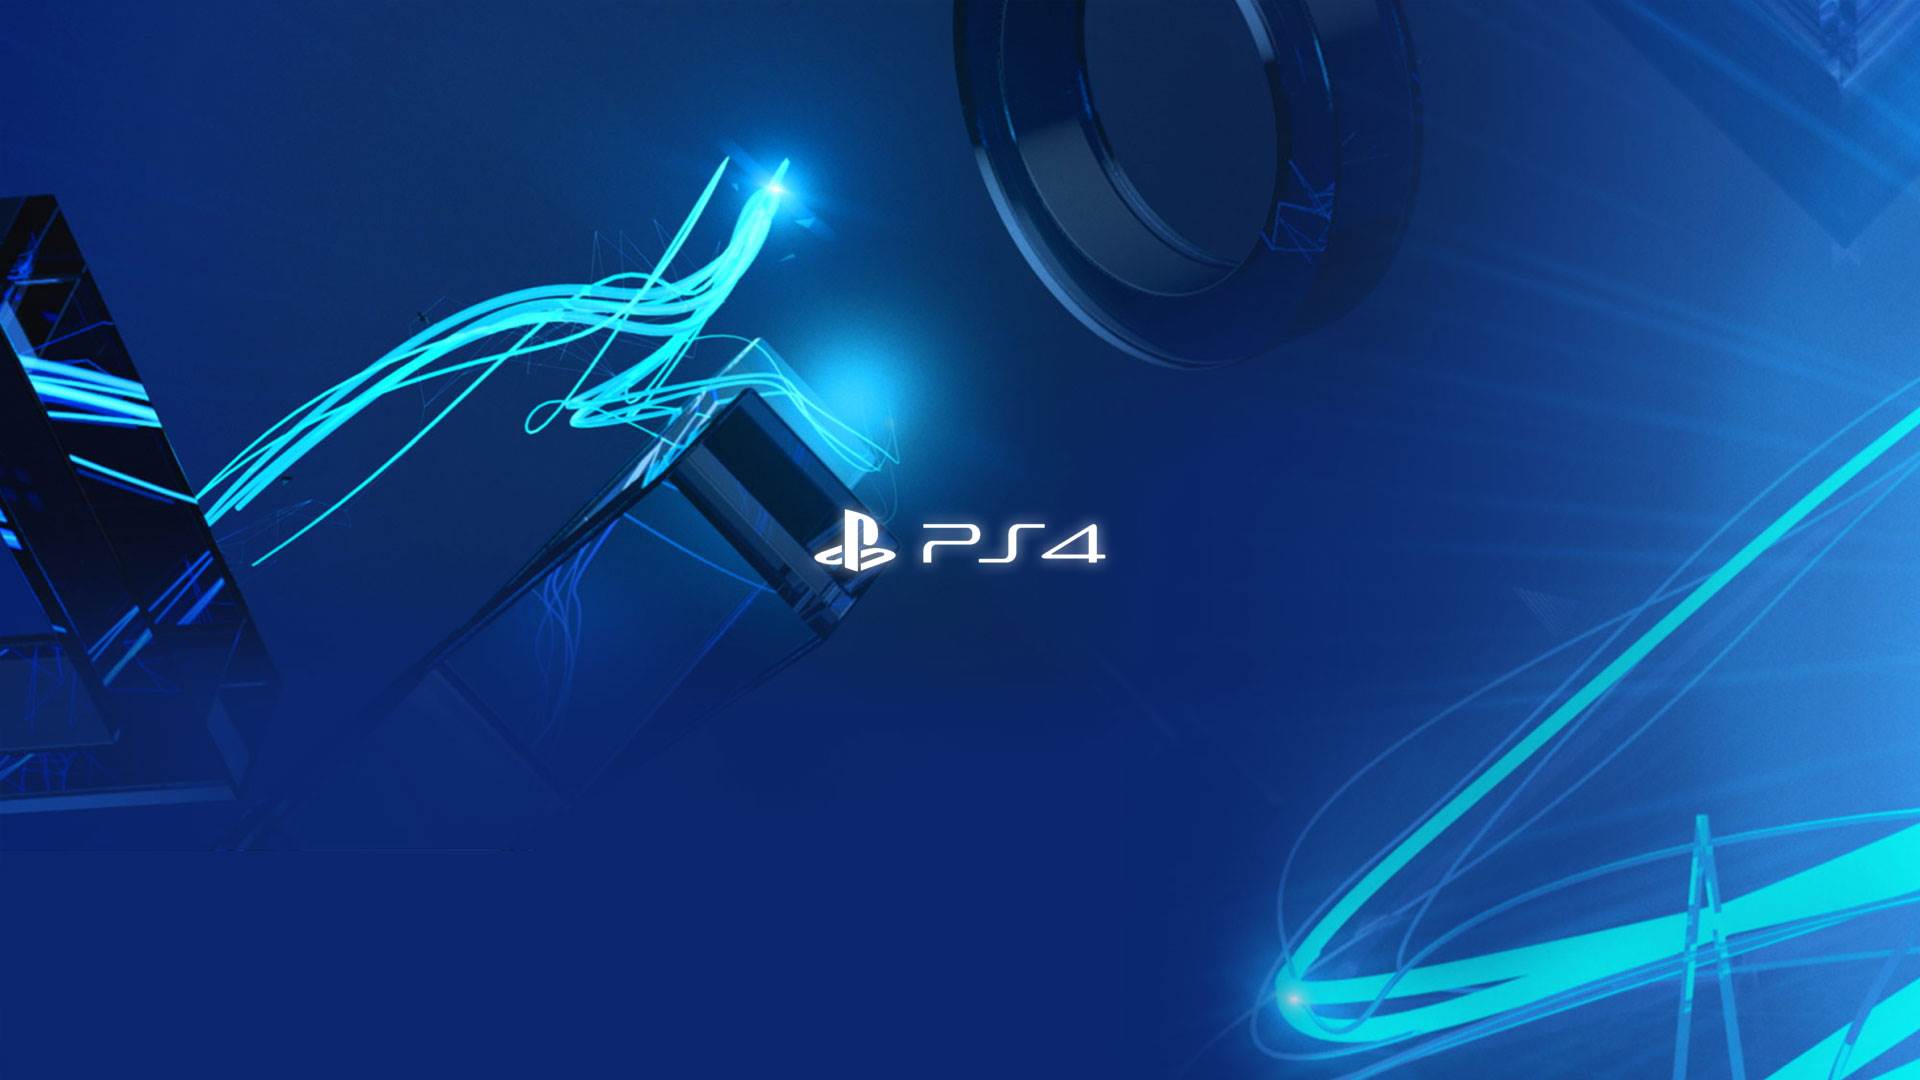 PS4 Wallpapers in 1080P HD GamingBoltcom Video Game News Reviews